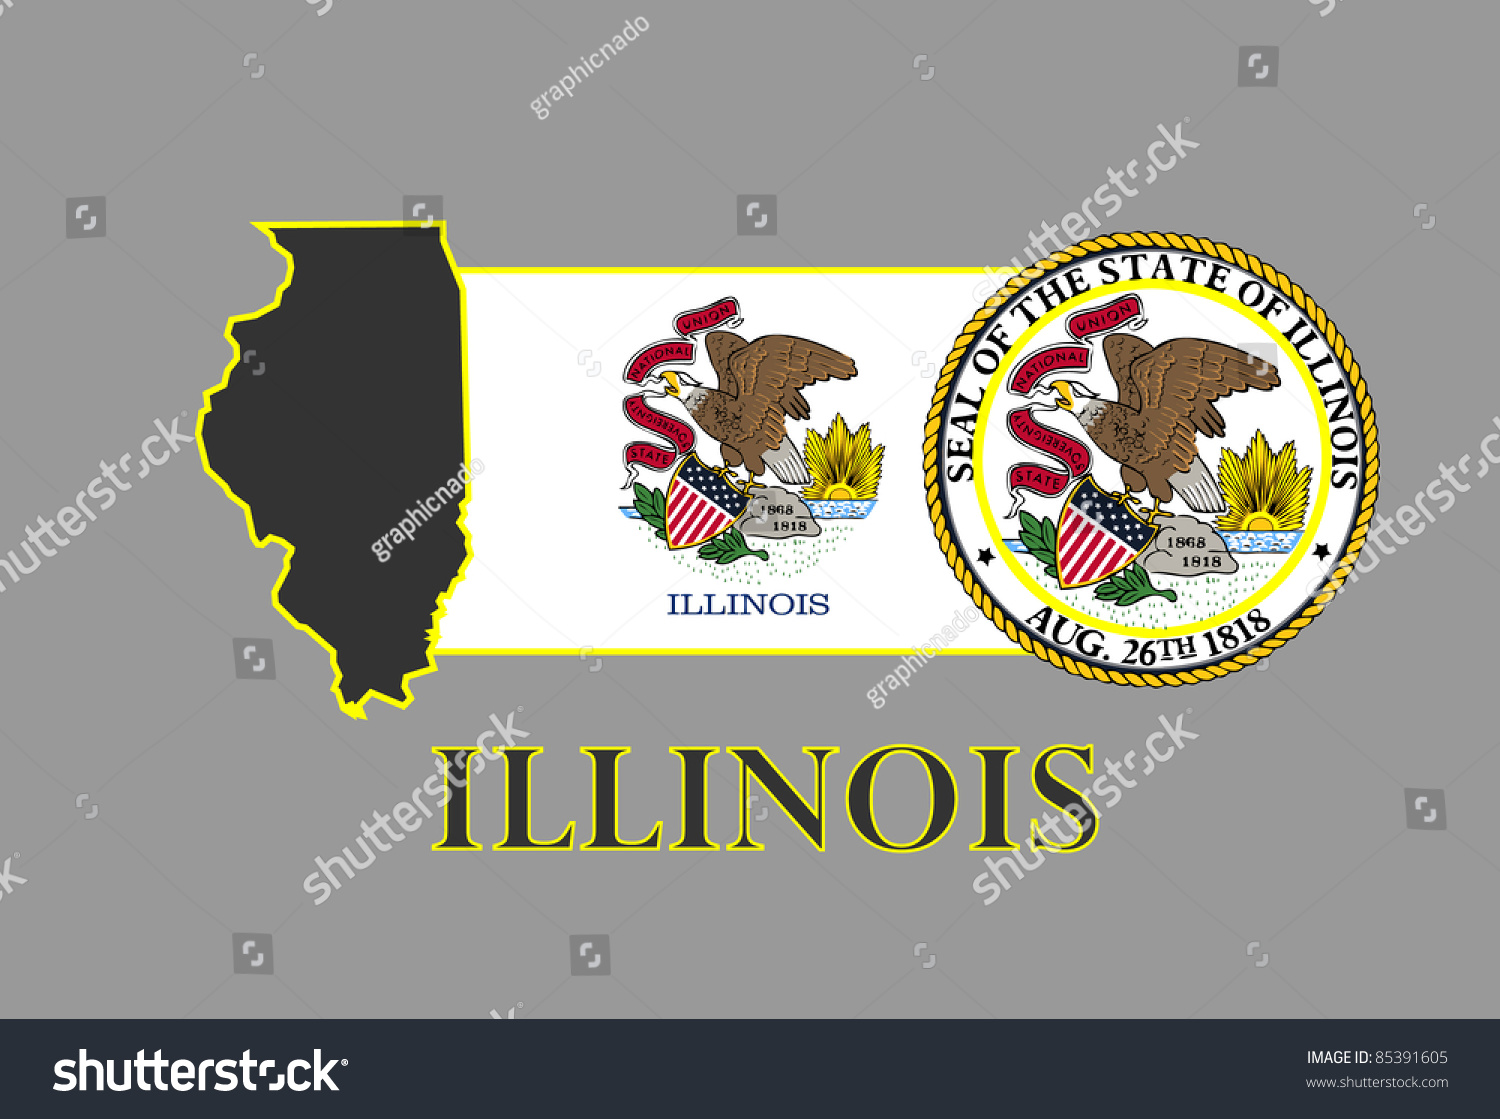 SVG of Illinois state map, flag, seal and name. svg